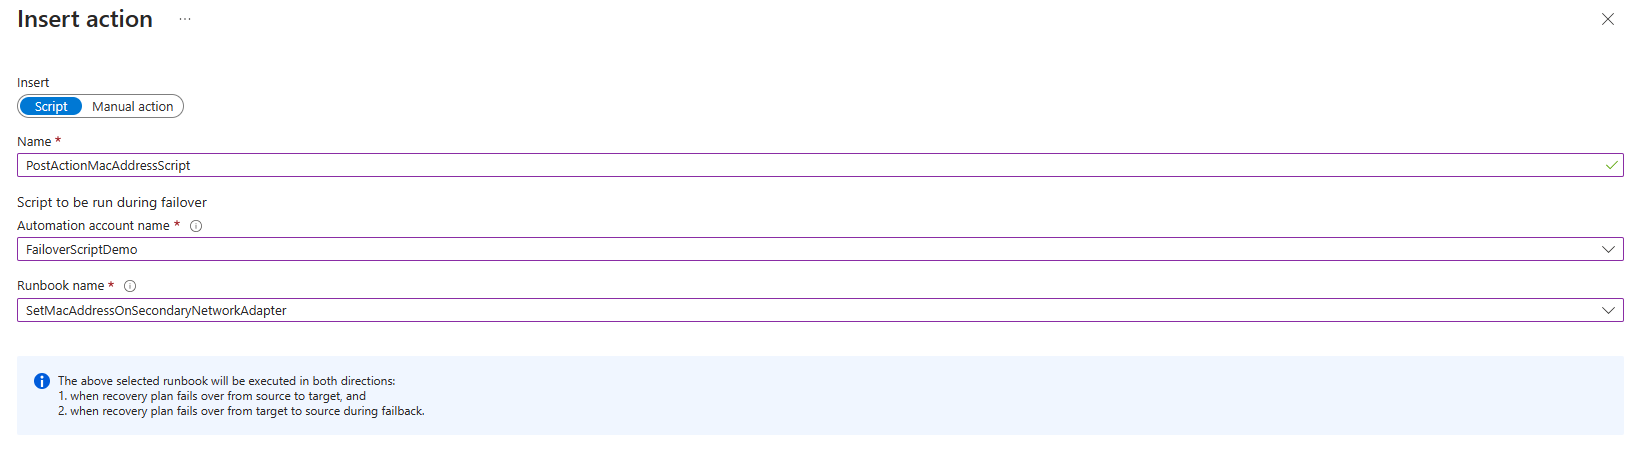 A purple lines on a white background

Description automatically generated